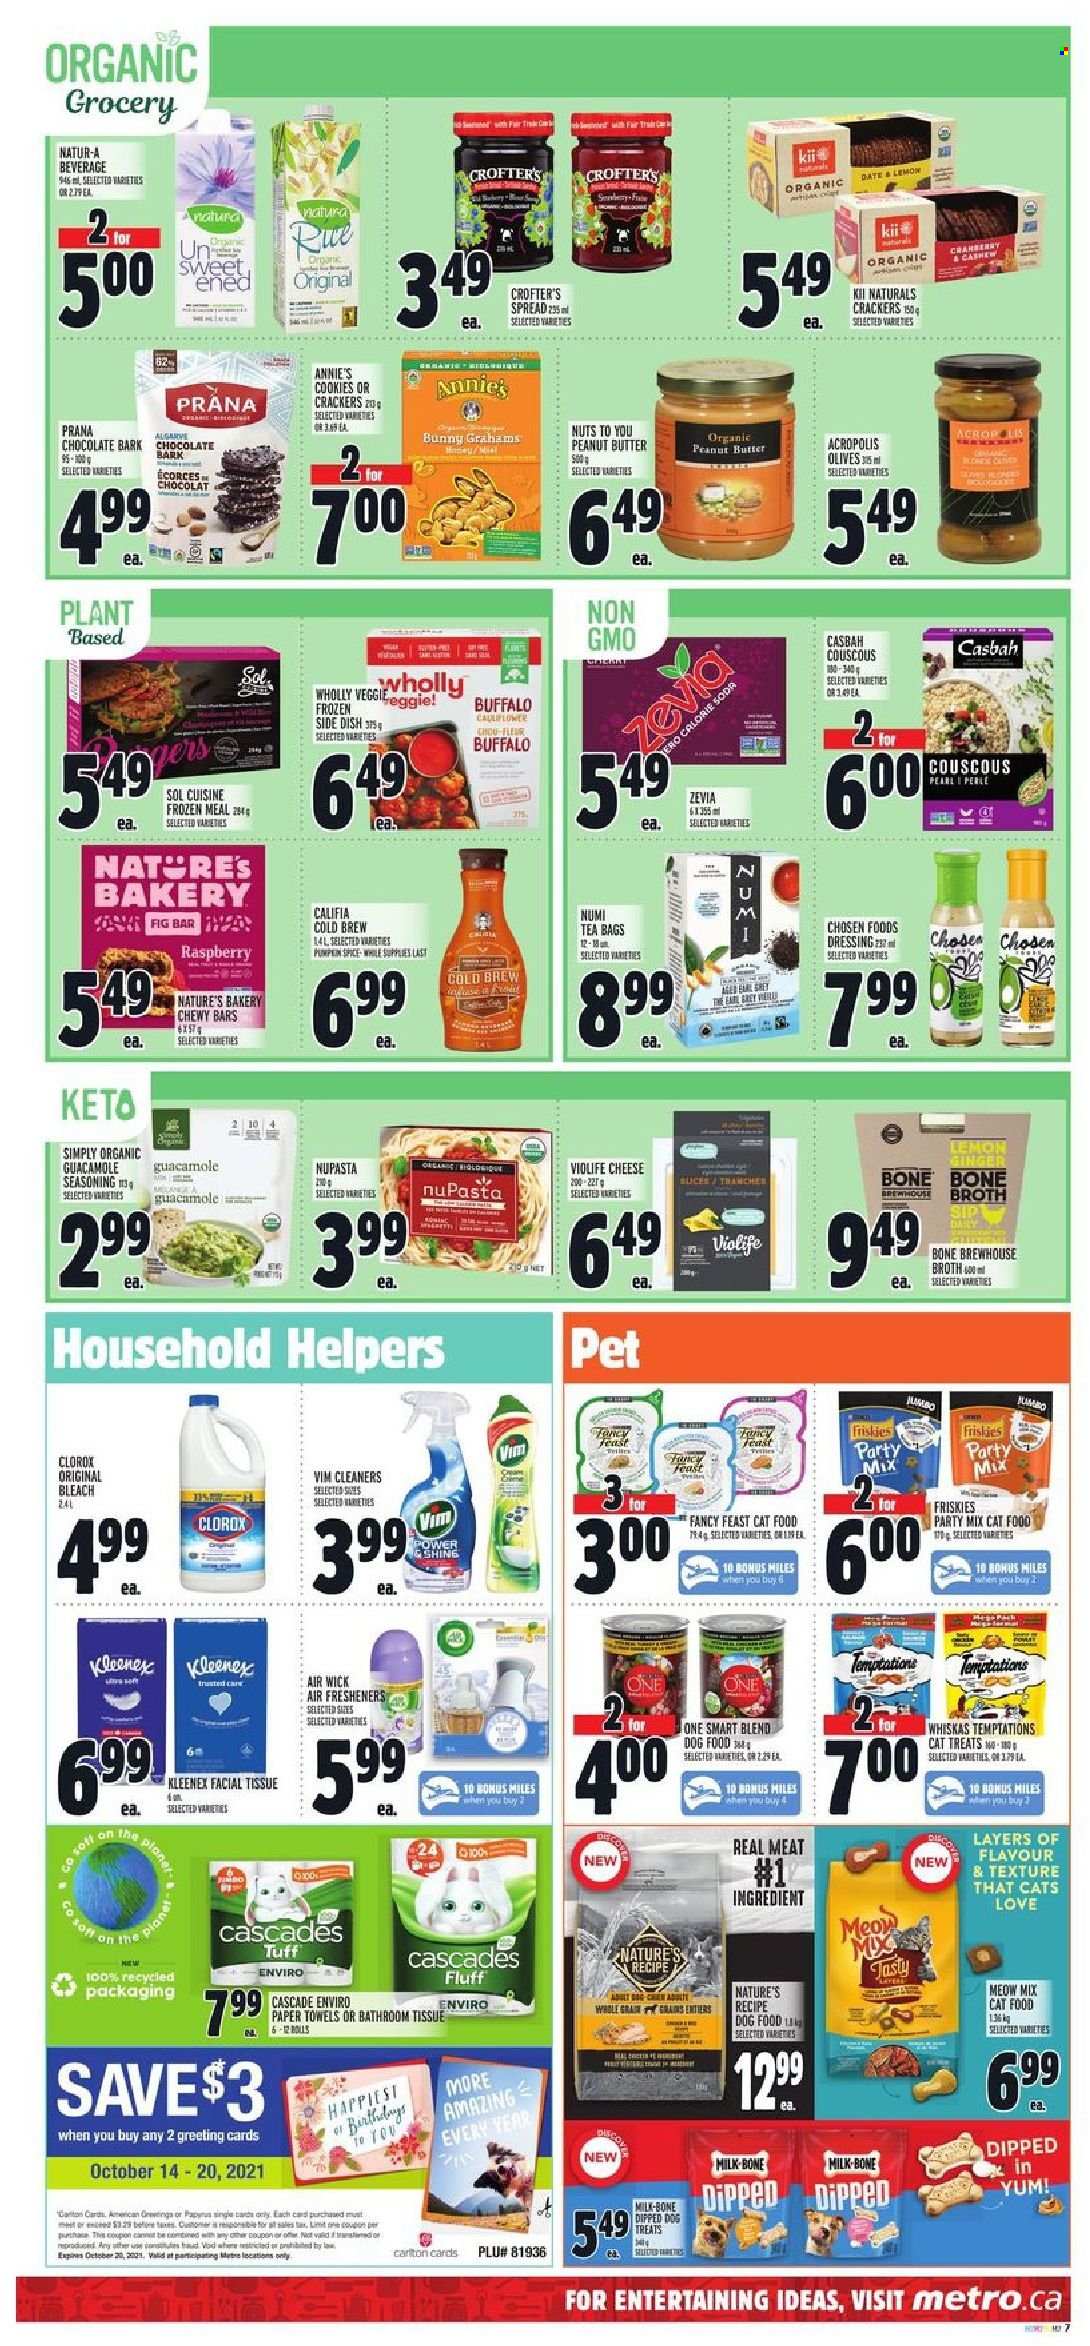 thumbnail - Metro Flyer - October 14, 2021 - October 20, 2021 - Sales products - ginger, Annie's, guacamole, milk, cookies, graham crackers, chocolate, crackers, broth, spice, dressing, peanut butter, soda, Ciro, tea bags, Sol, bath tissue, Kleenex, kitchen towels, paper towels, bleach, Clorox, Cascade, air freshener, Air Wick, animal food, cat food, dog food, Meow Mix, Fancy Feast, Friskies, couscous, olives, Whiskas. Page 9.